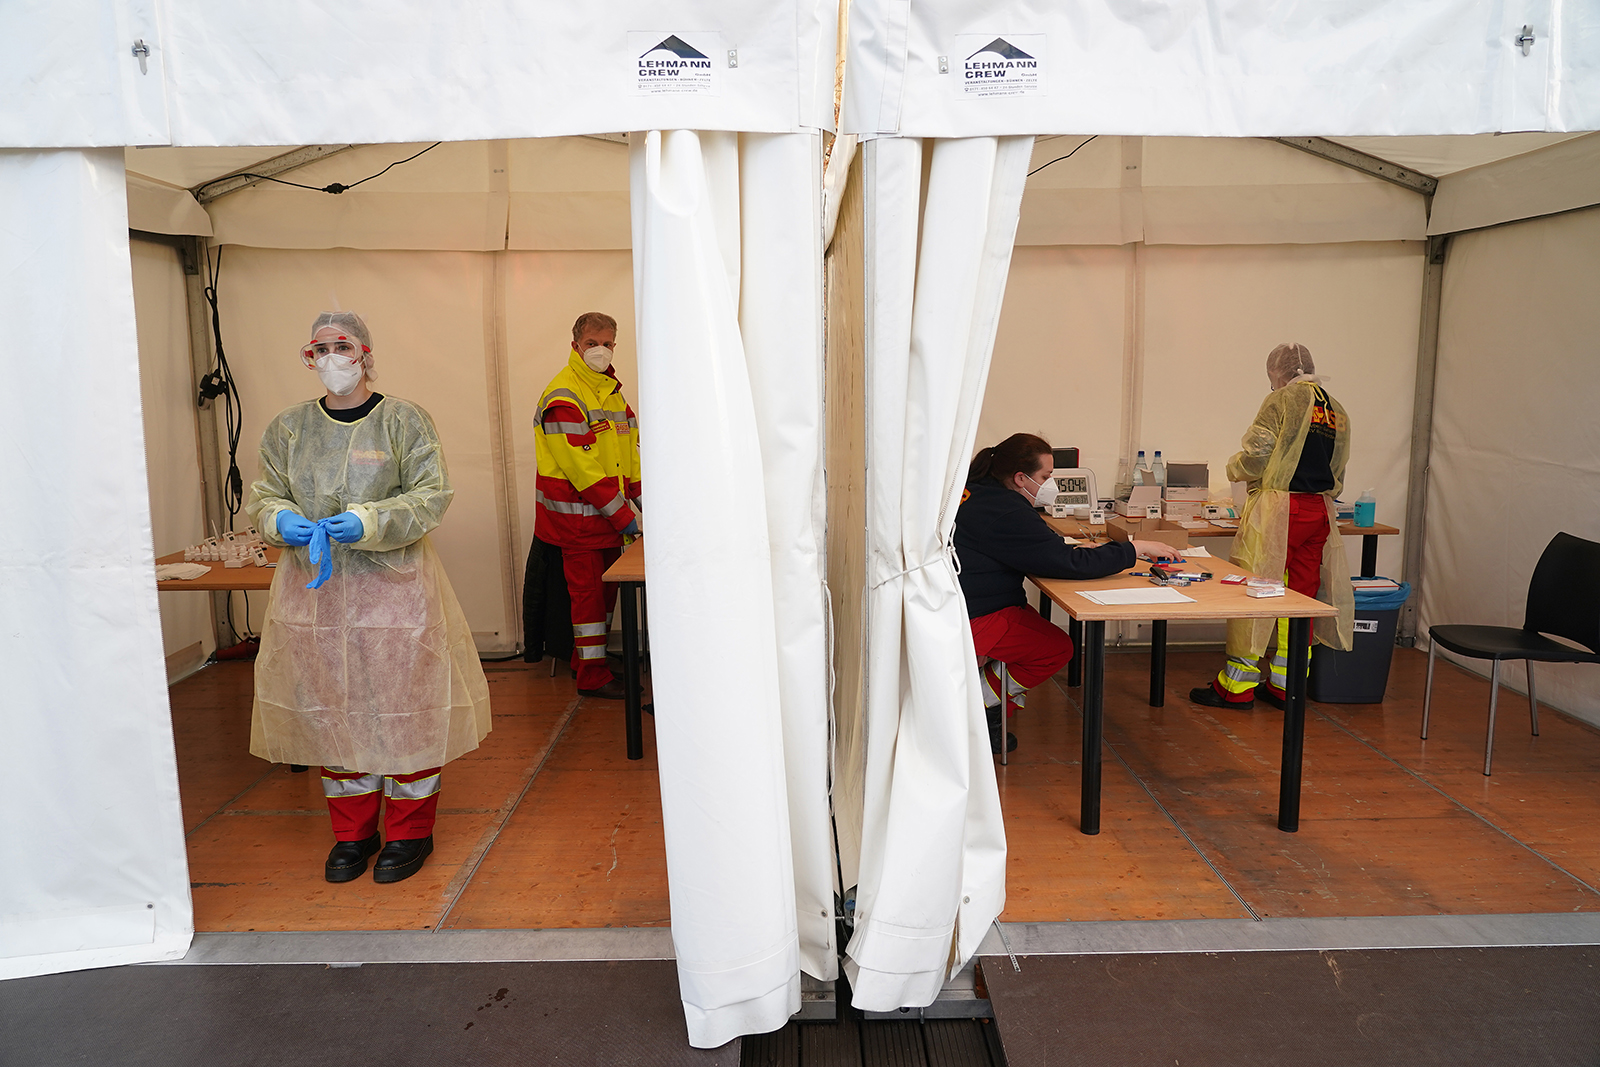 Medical workers of the ASB (Arbeiter-Samariter-Bund) charity aid agency conduct rapid antigen tests for Covid-19 infection for technical staff, journalists and party members prior to the virtual German Greens Party federal congress during the second wave of the coronavirus pandemic on November 20, in Berlin.